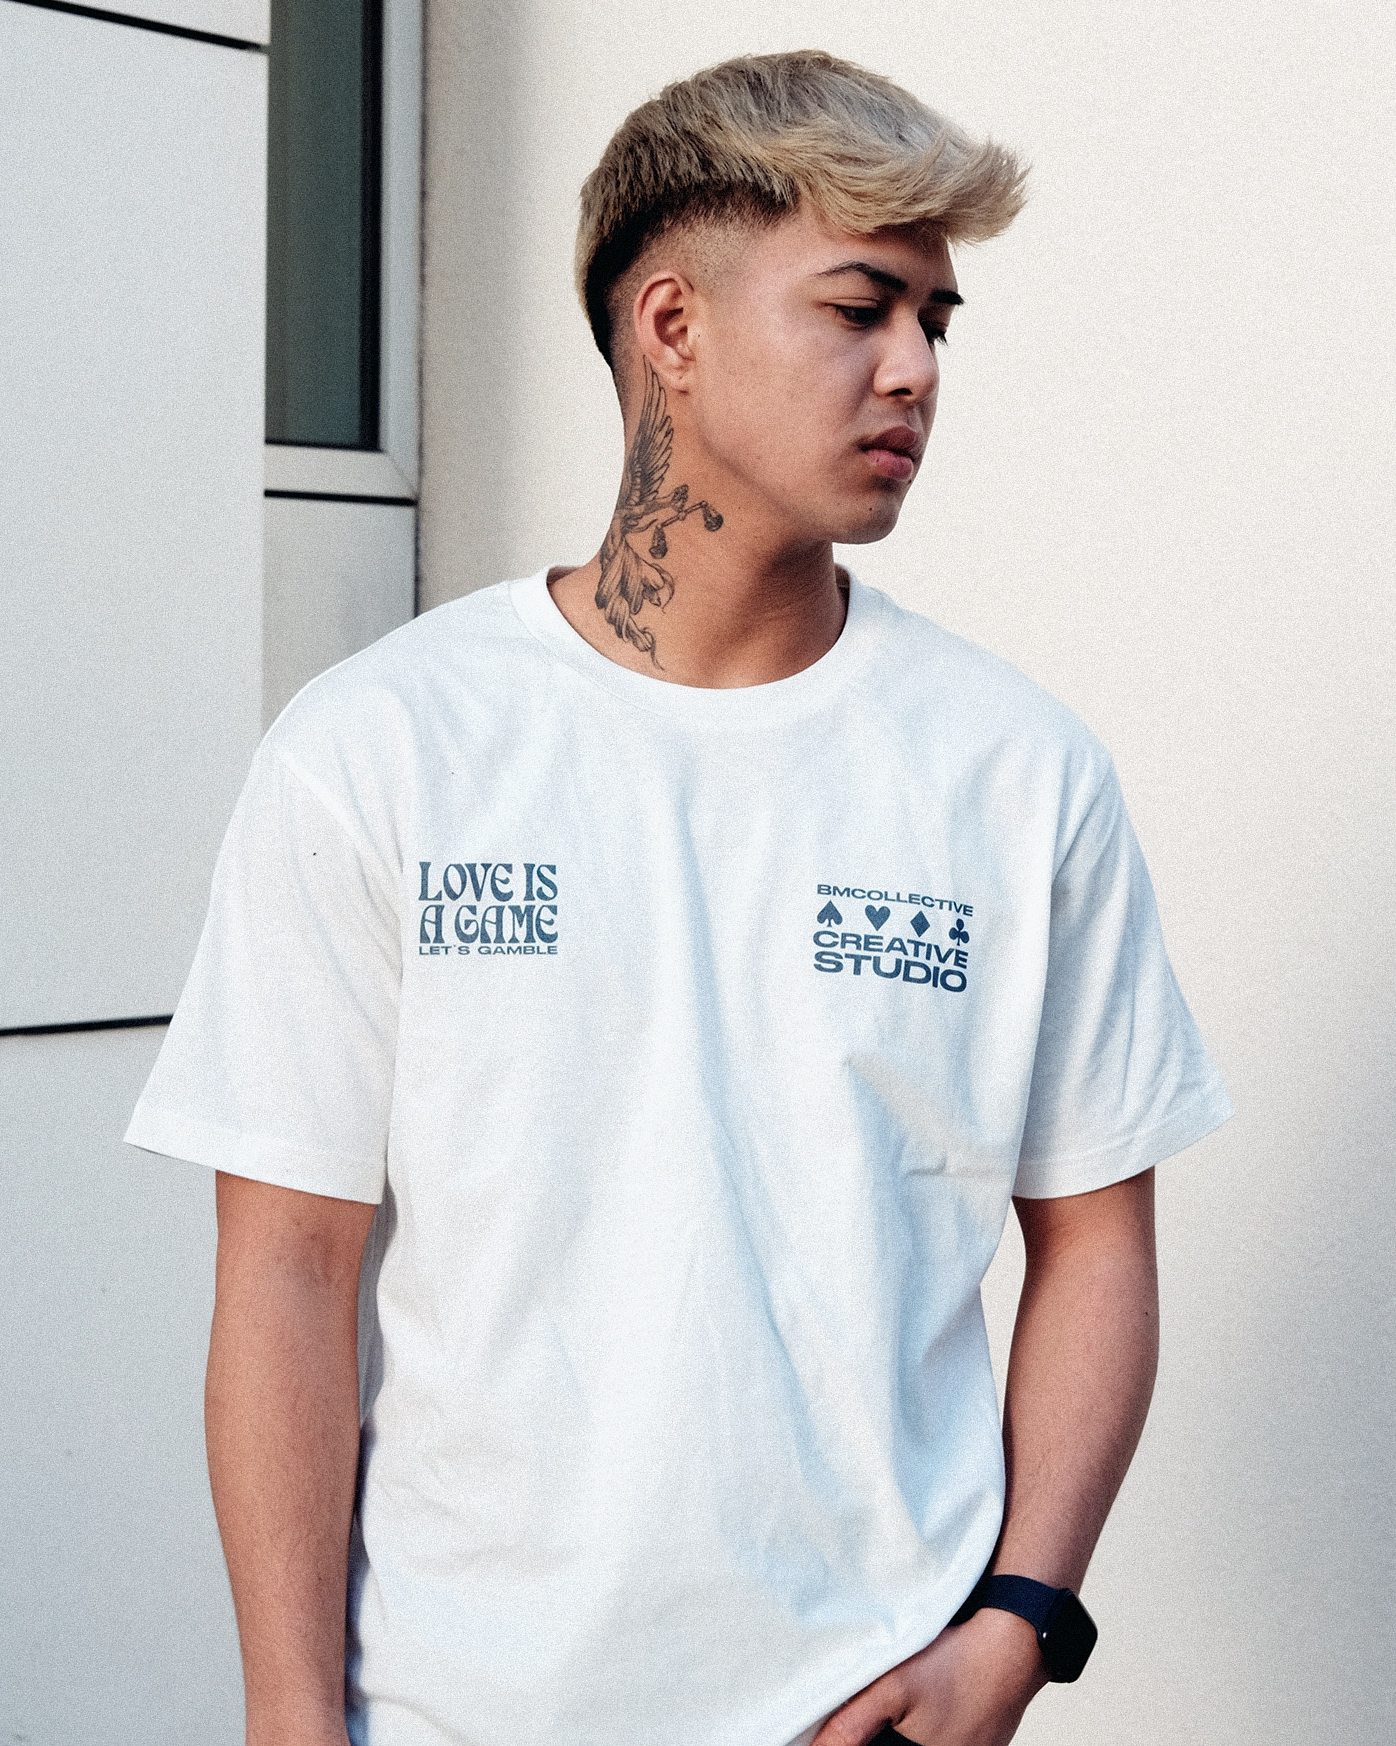 Love Is A Game Tee